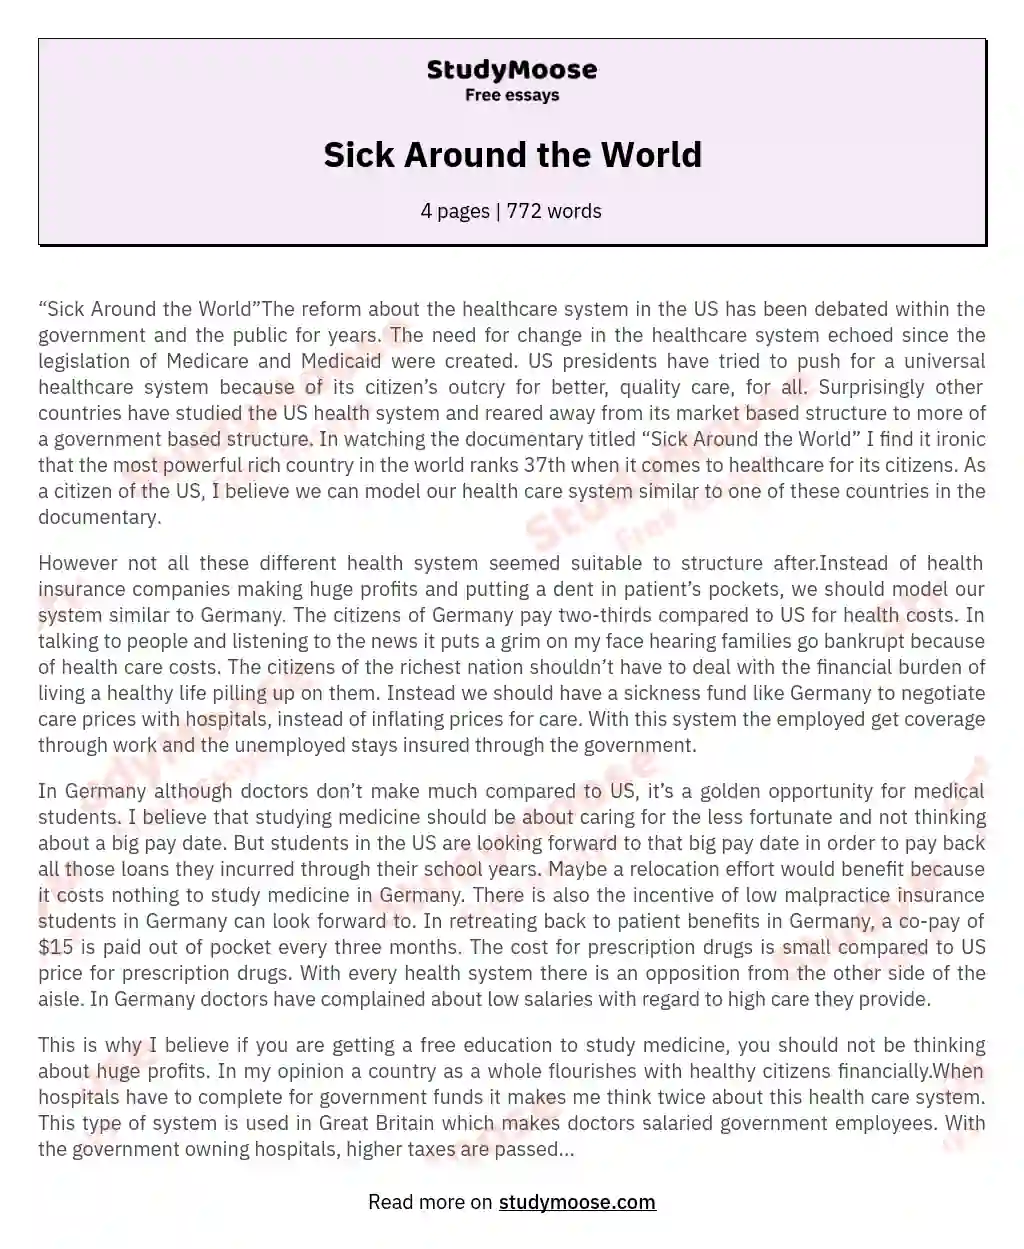 Exploring Healthcare Reform: Lessons from "Sick Around the World" essay